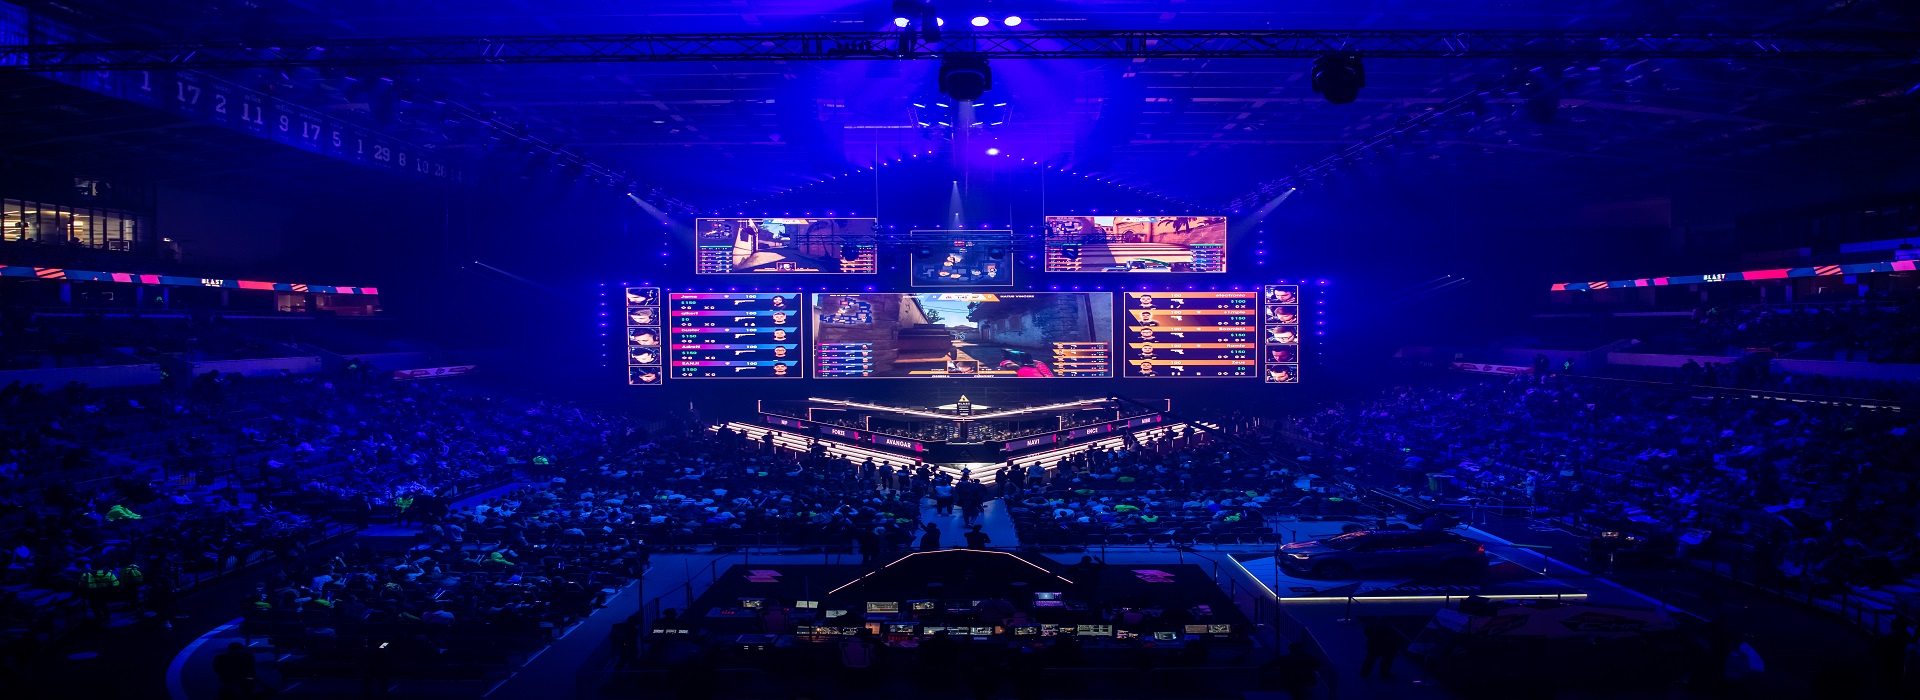 Skylightz Gaming to Invest $150,000 in Indian Esports Talent by 2022